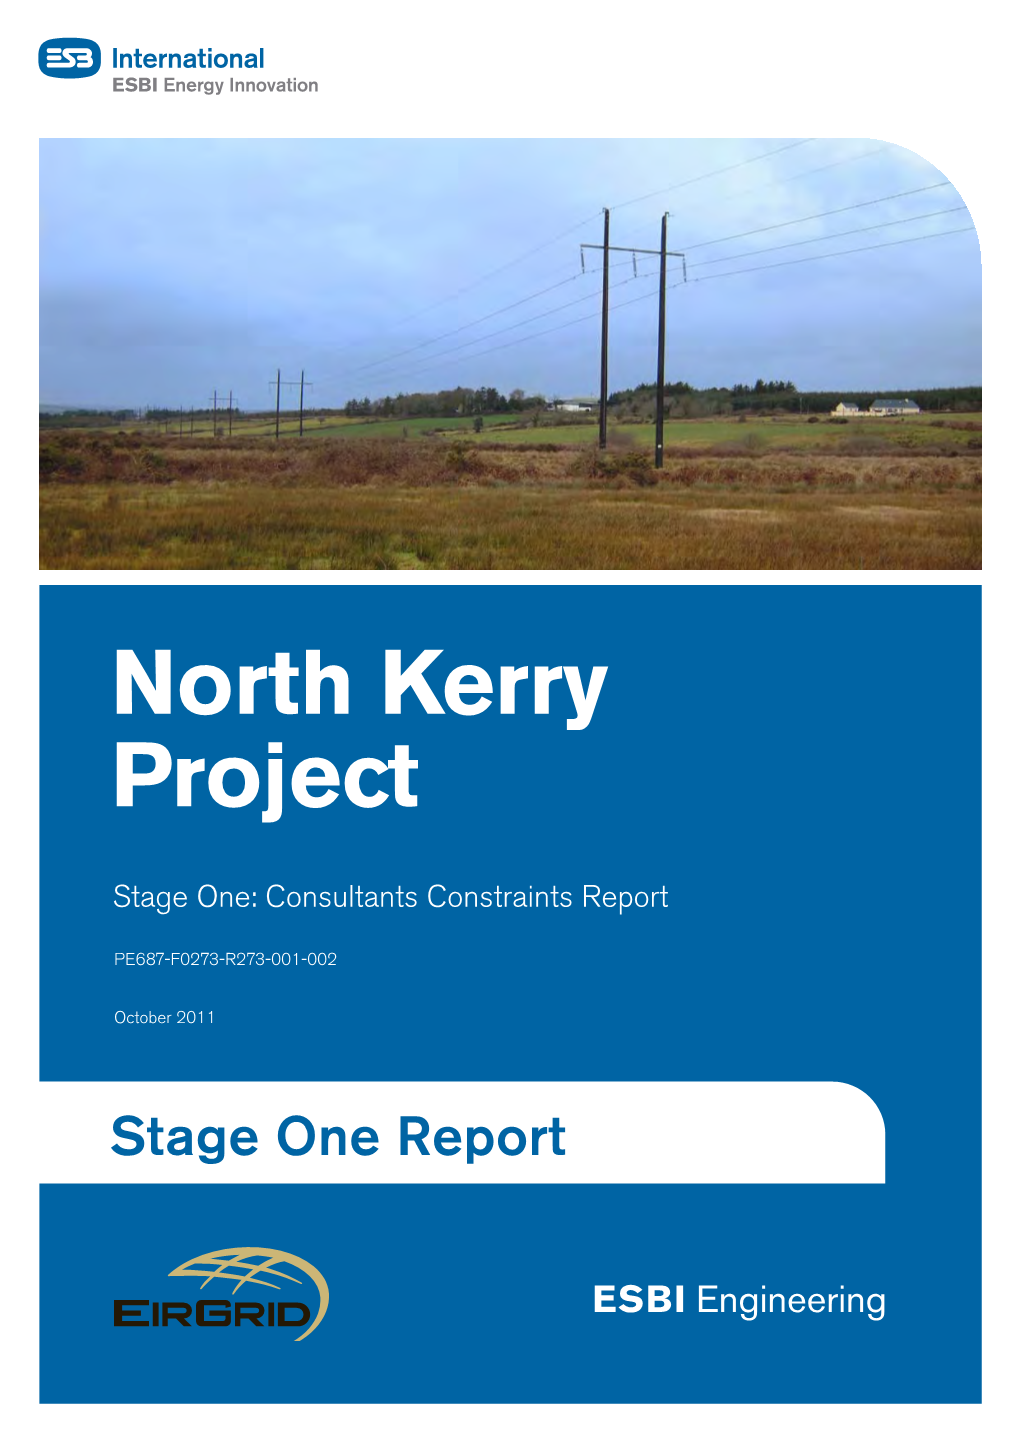 North Kerry Project Stage One: Consultants Constraints Report